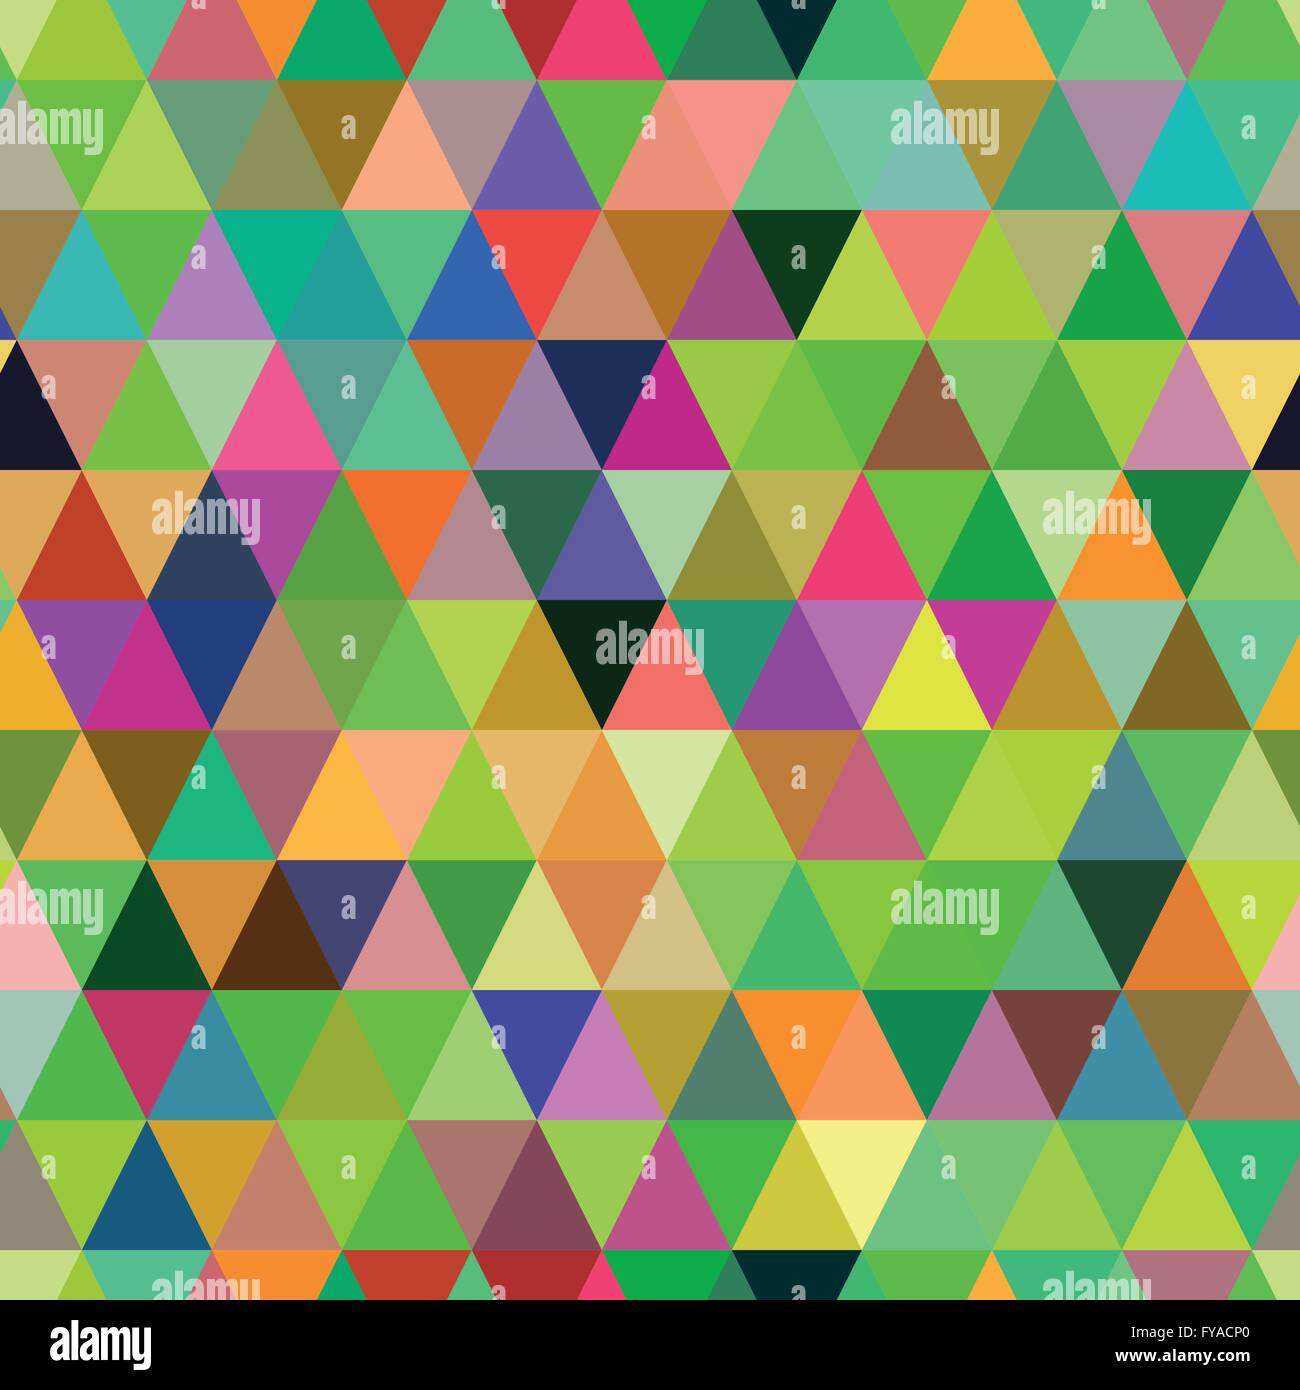 Abstract geometric triangle seamless pattern. Stock Vector